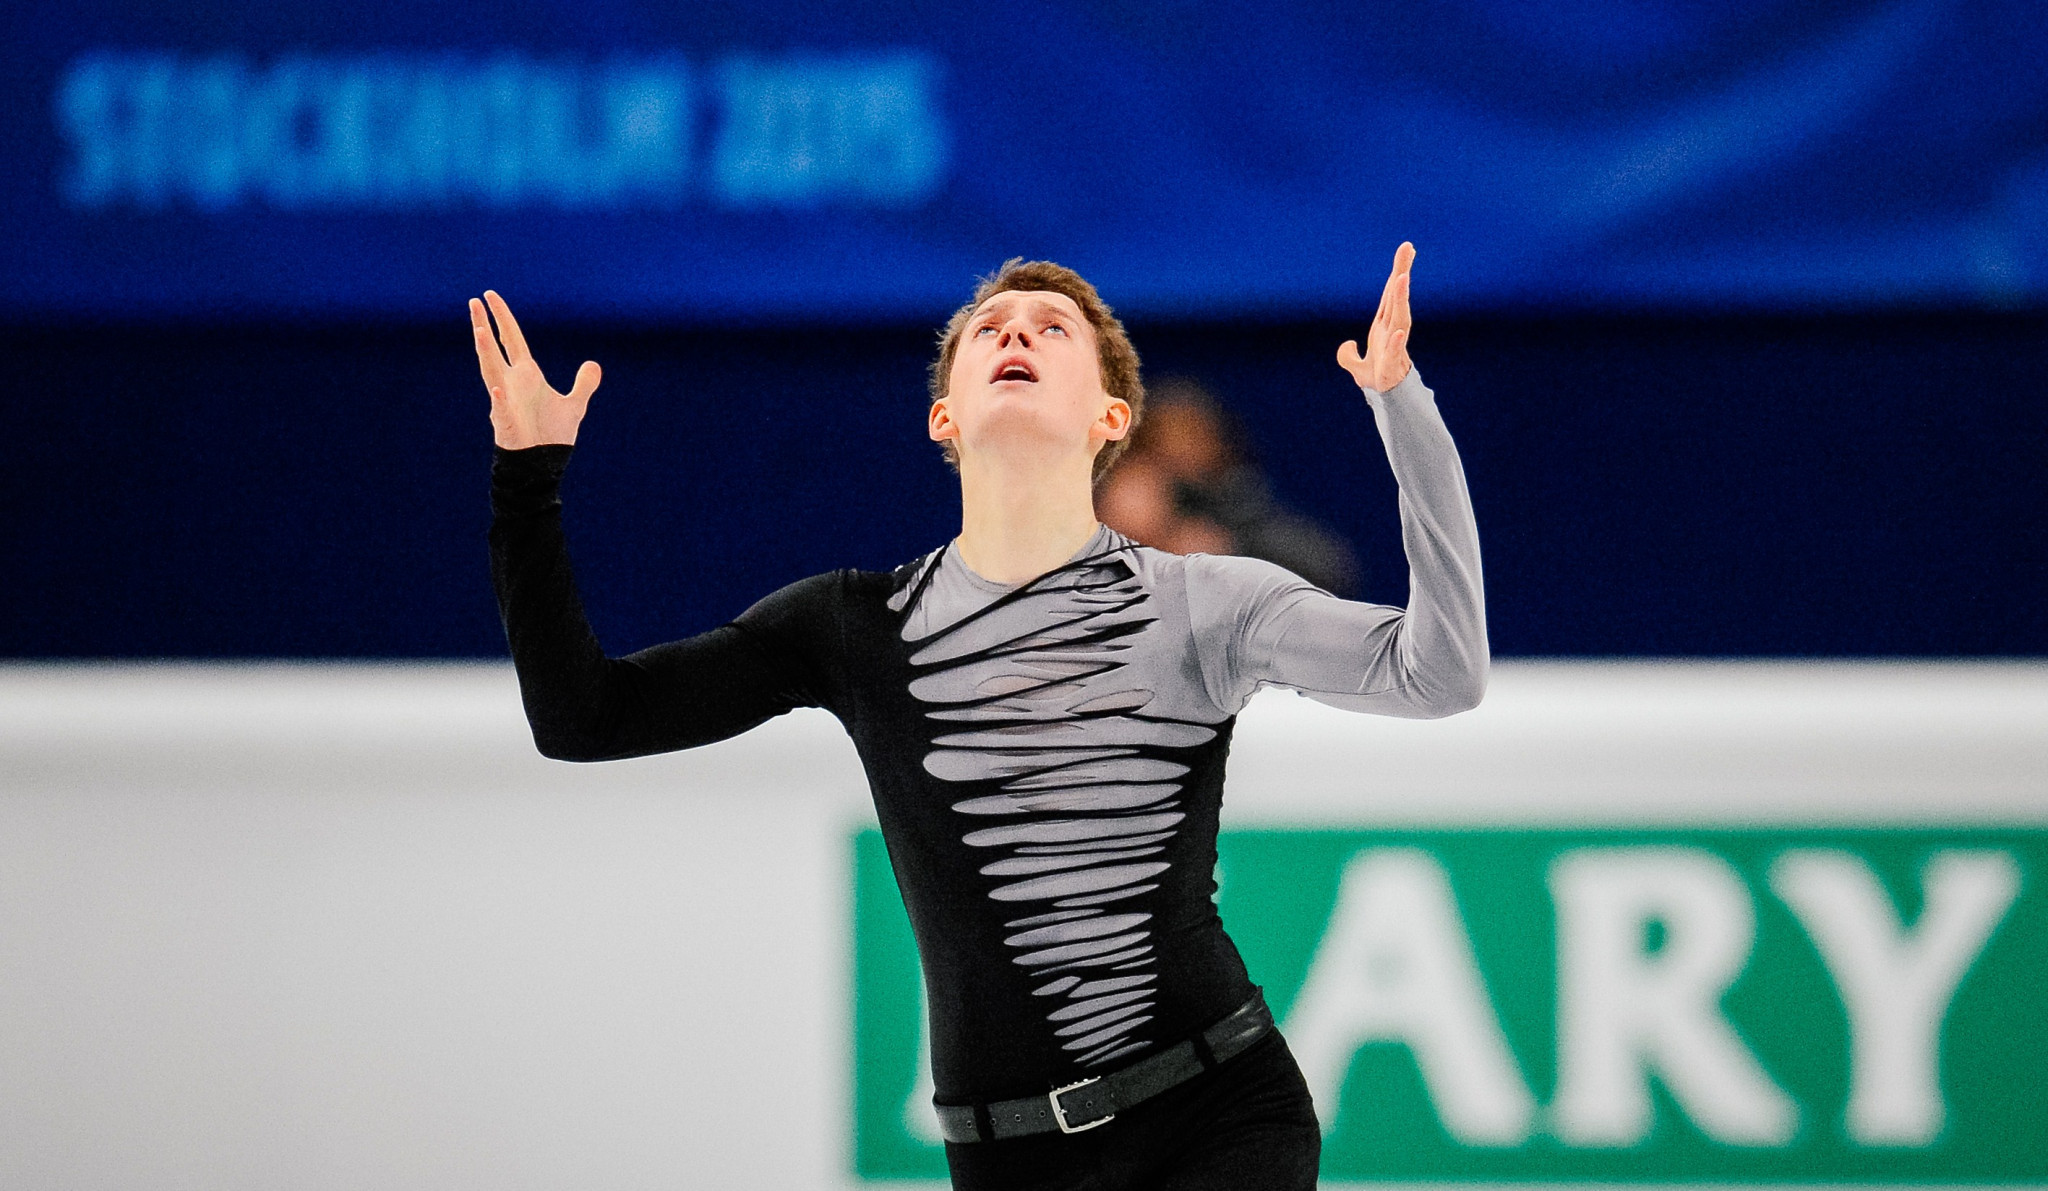 Maxim Kovtun claimed one of his two European Championship silver medals in Stockholm in 2015 ©Getty Images